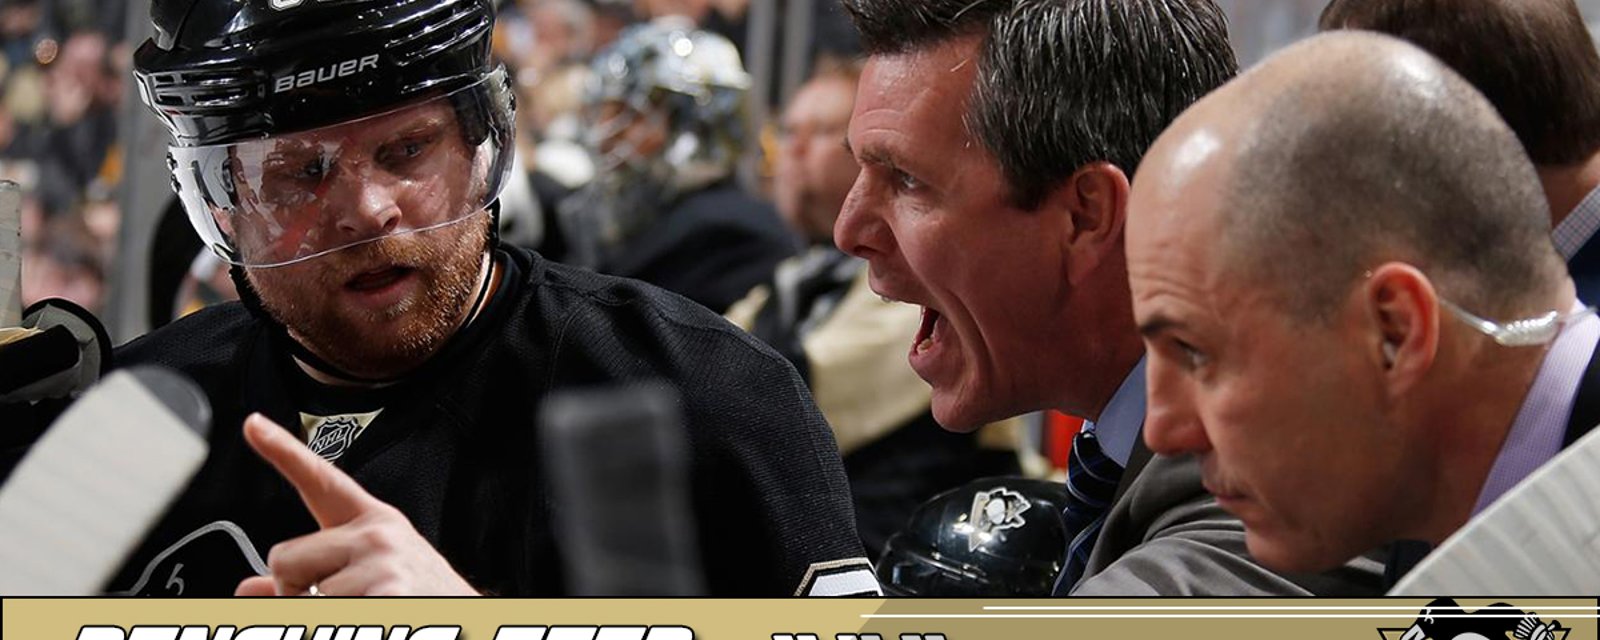 Penguins coach admits, “I don't know what's going to happen after the season.“